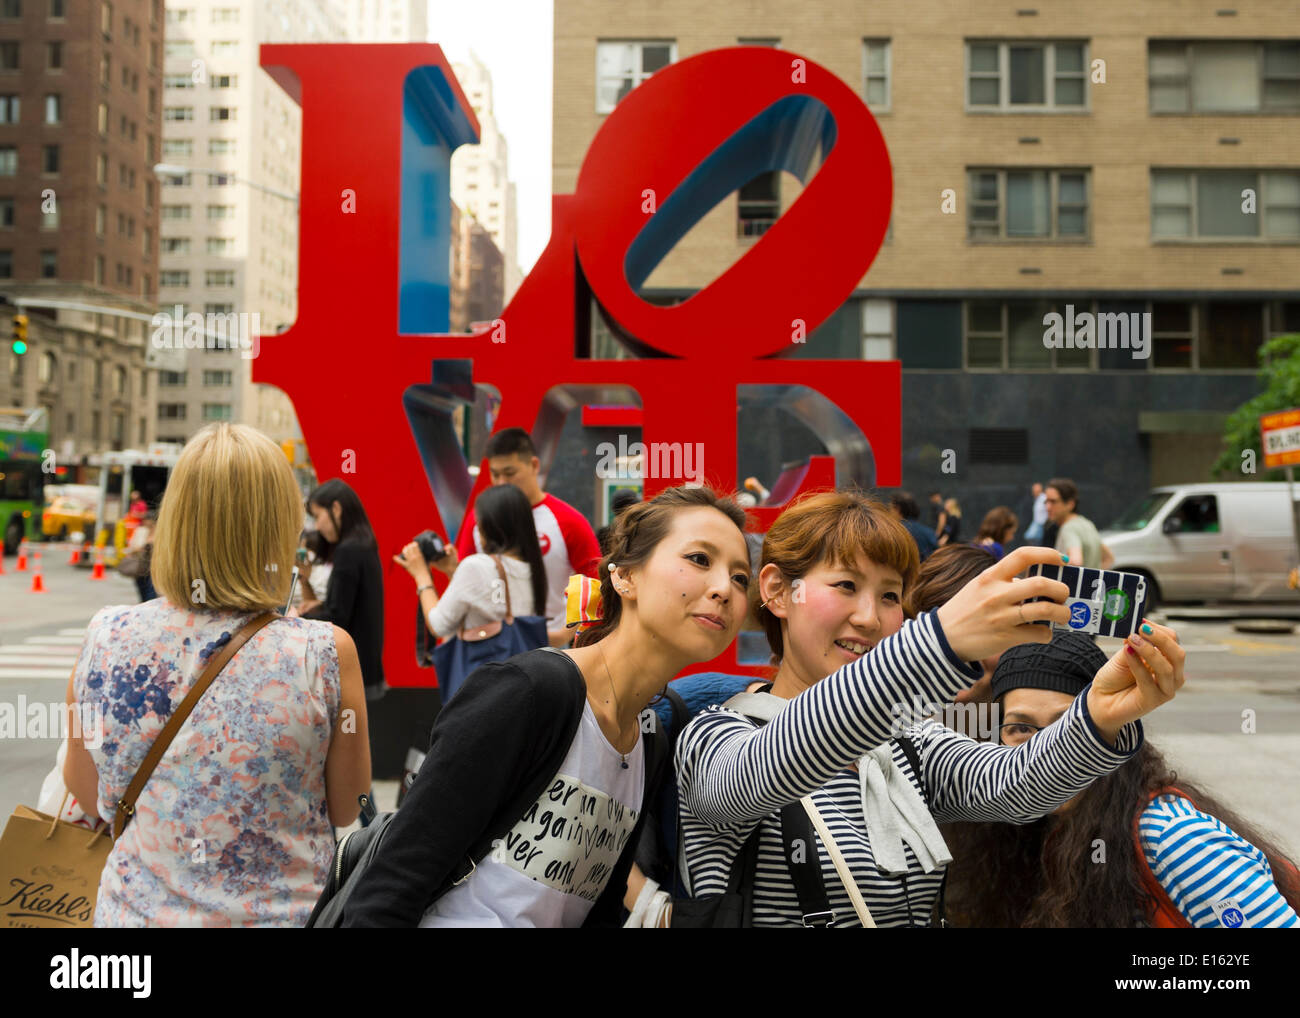 Manhattan, New York, U.S. - May 21, 2014 - Several girl friends take Selfies photos with a cell phone, with the colorful famous LOVE sculpture by Robert Indiana on 6th Avenue in the background, during a pleasant Spring day in Manhattan. Stock Photo